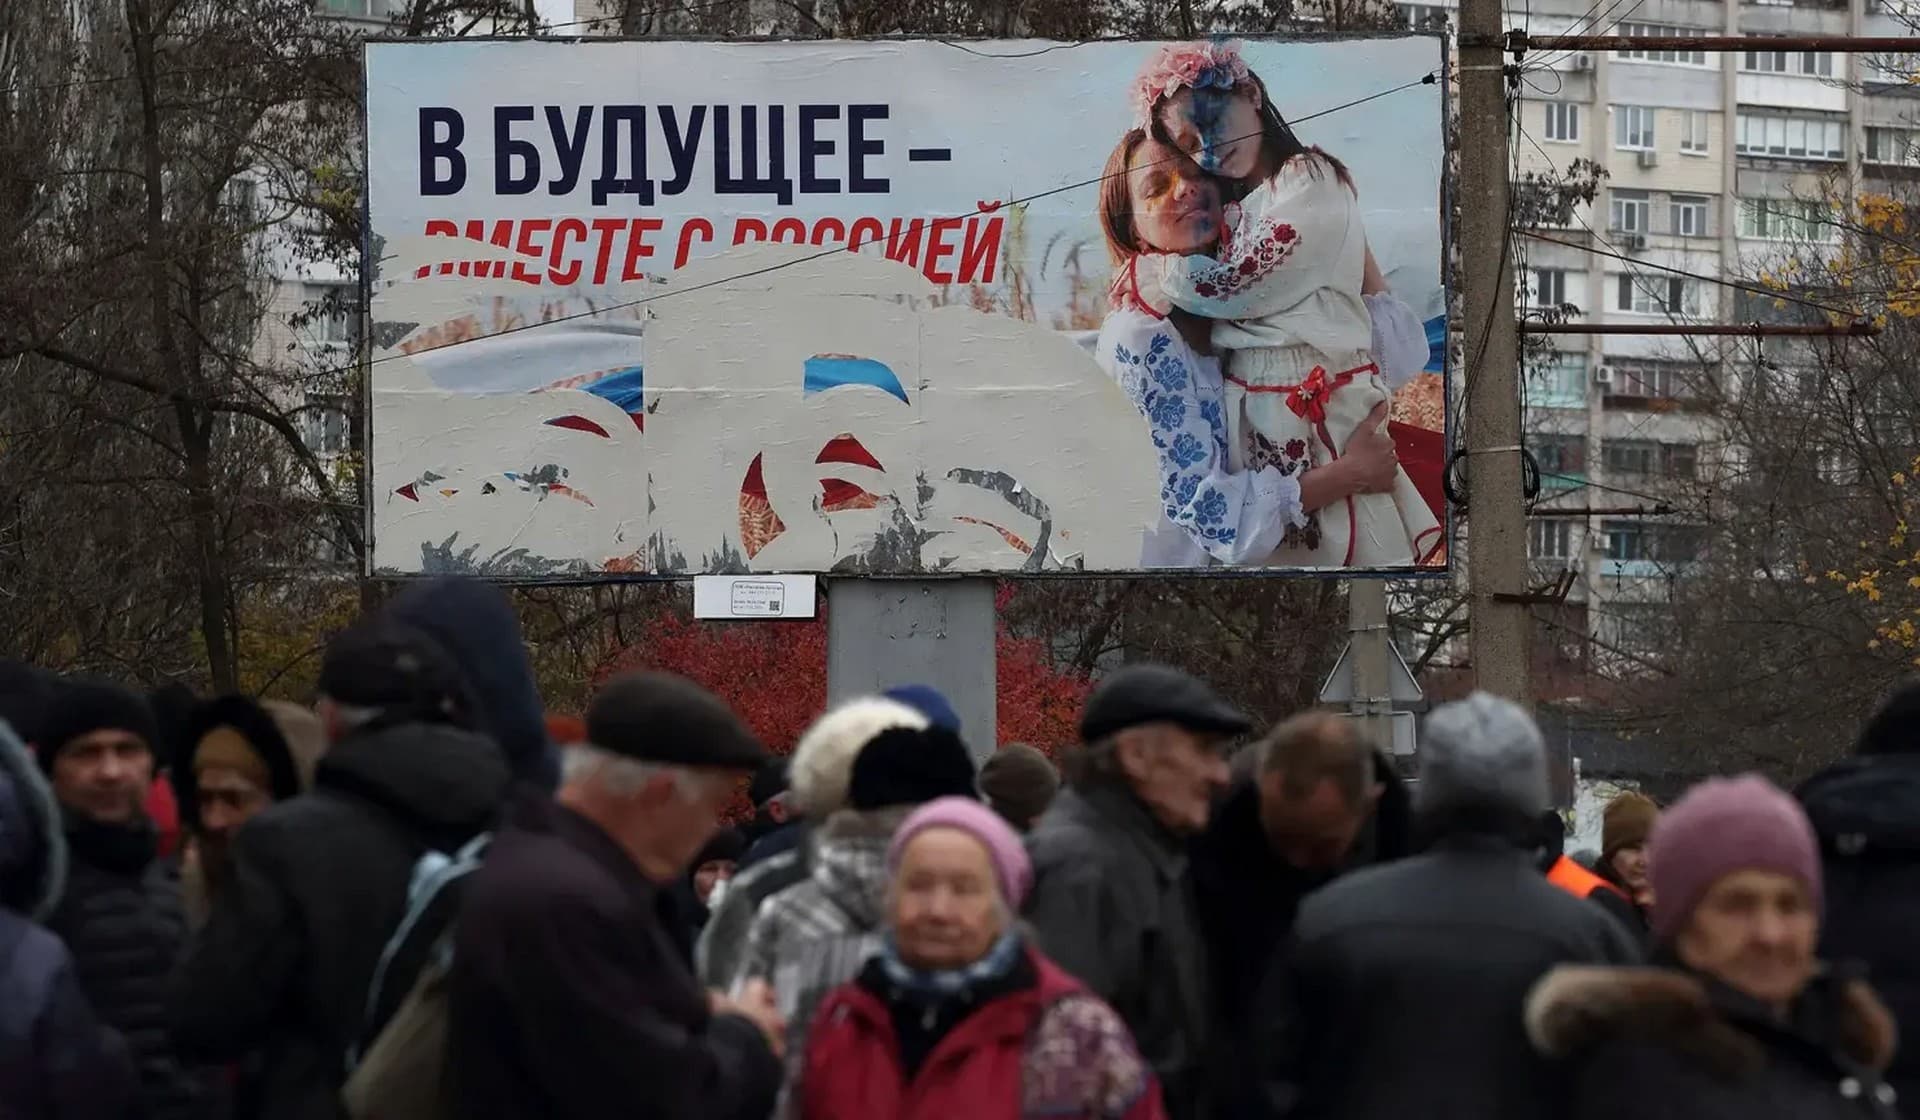 People wait for the distribution of humanitarian aid with a pro-Russian billboard in the background, after Russia's military retreat from Kherson